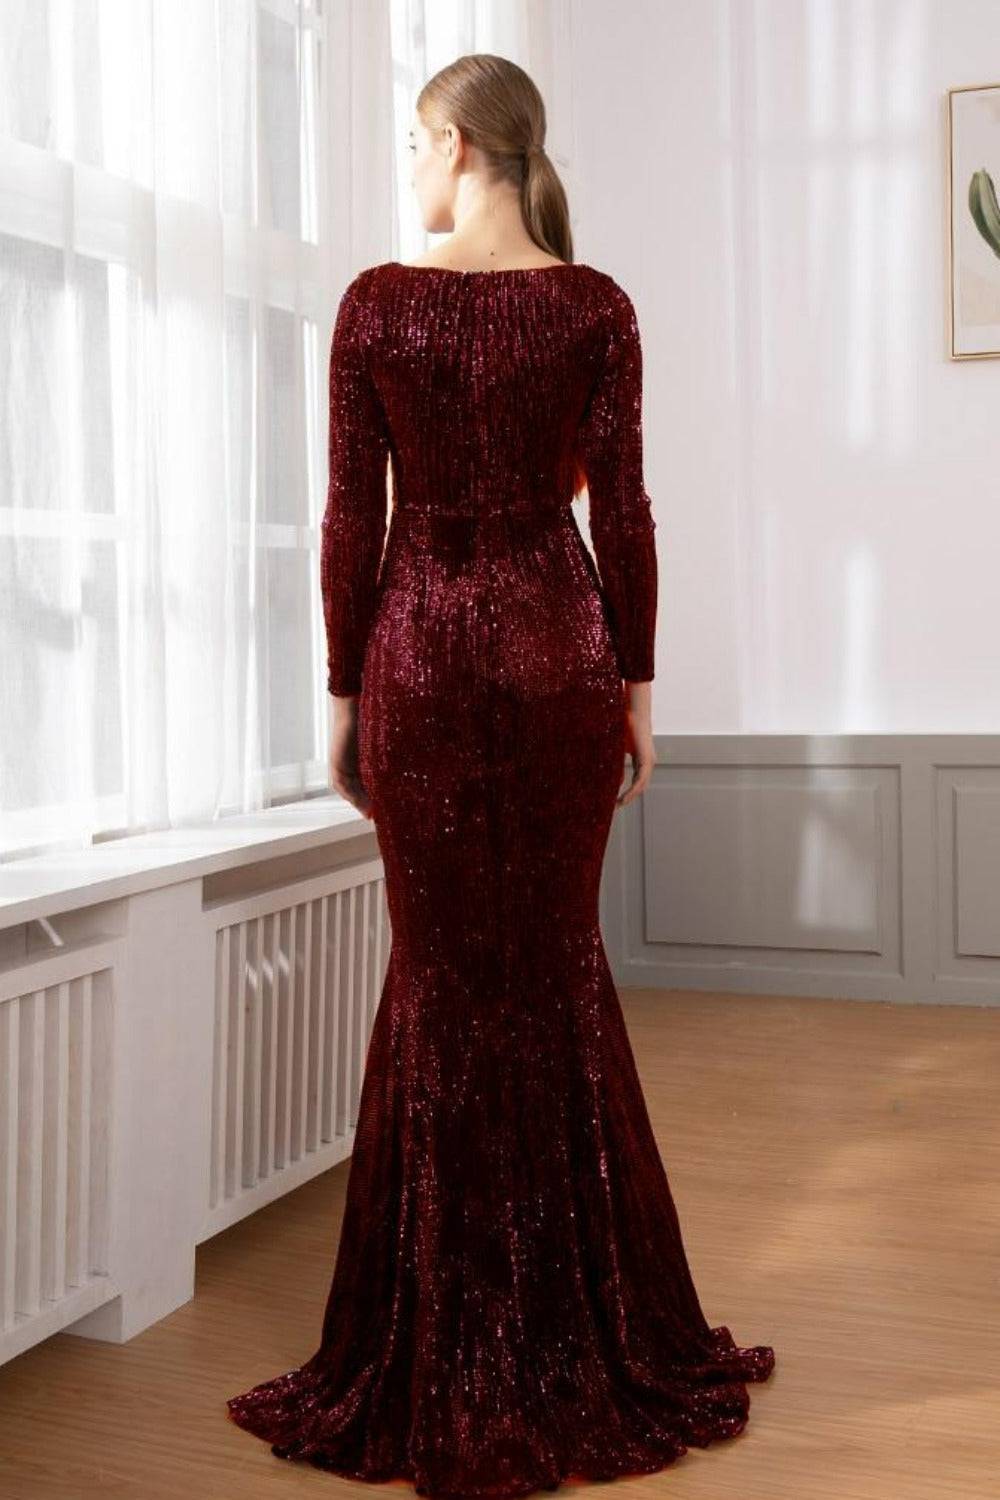 Red Long Sleeve Sequins Mermaid Maxi Dress - TGC Boutique - Red Evening Gown